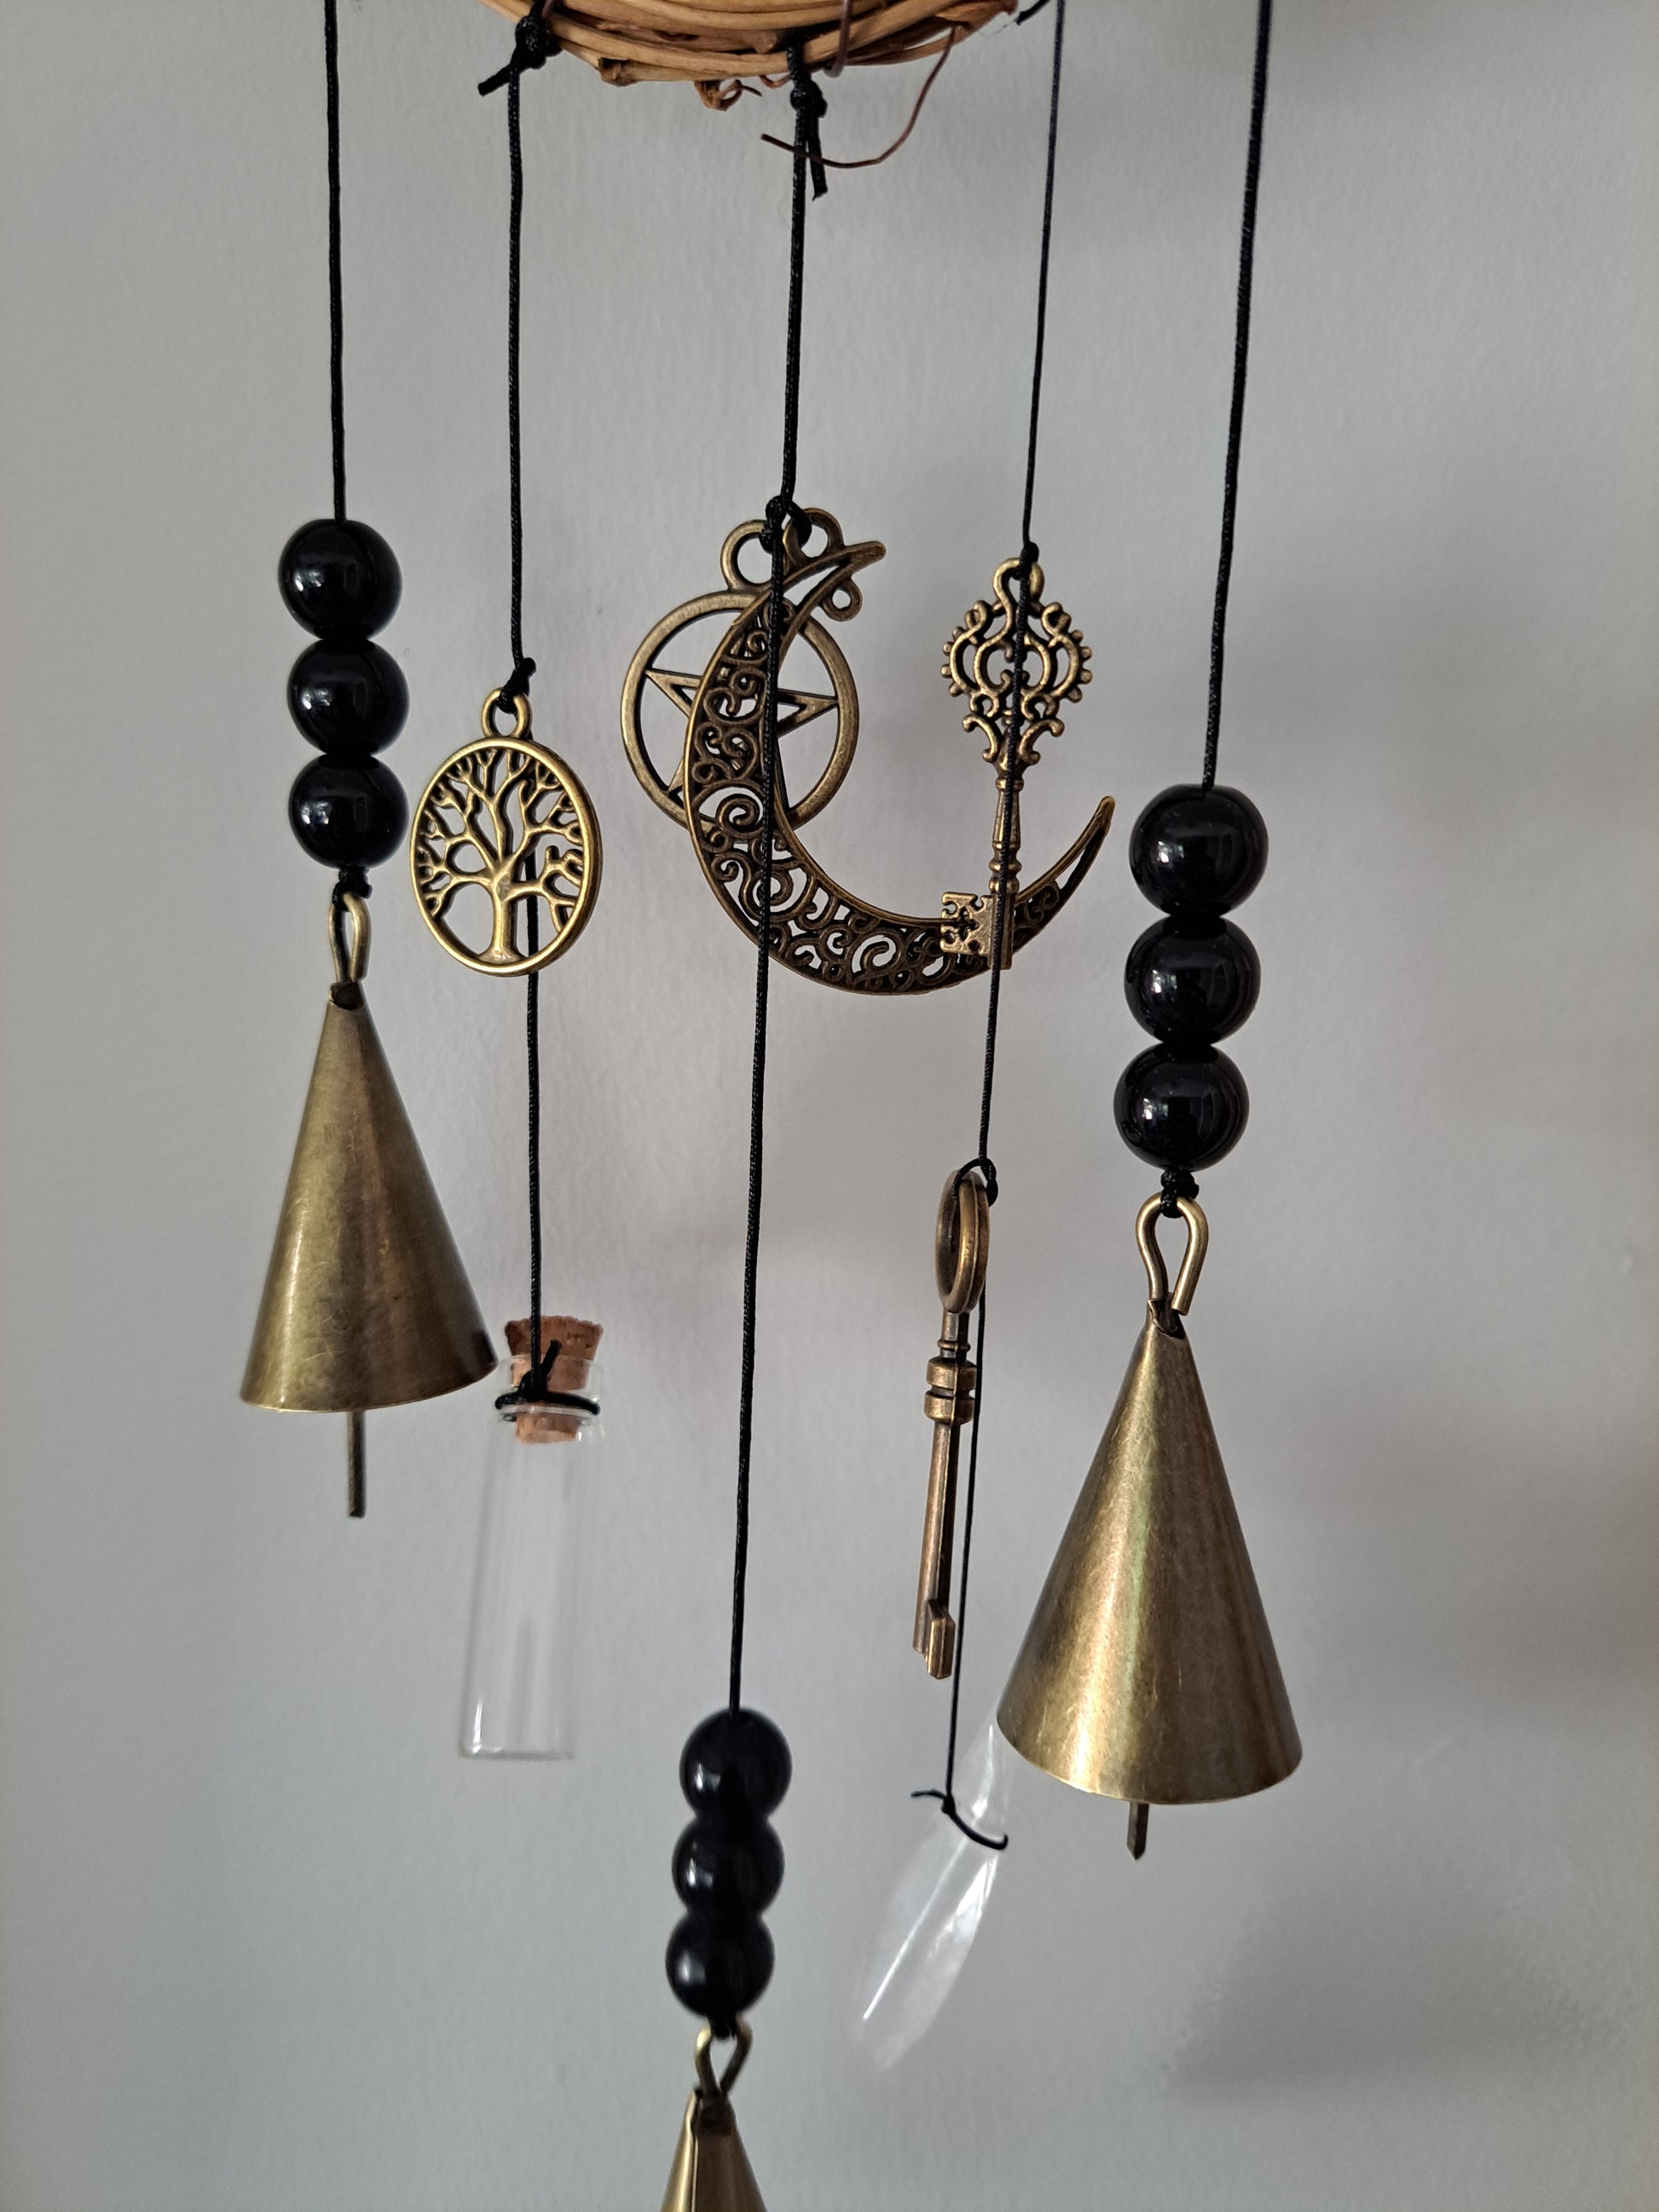 Witch Bells for Home Protection, Handmade Witchy Decor for